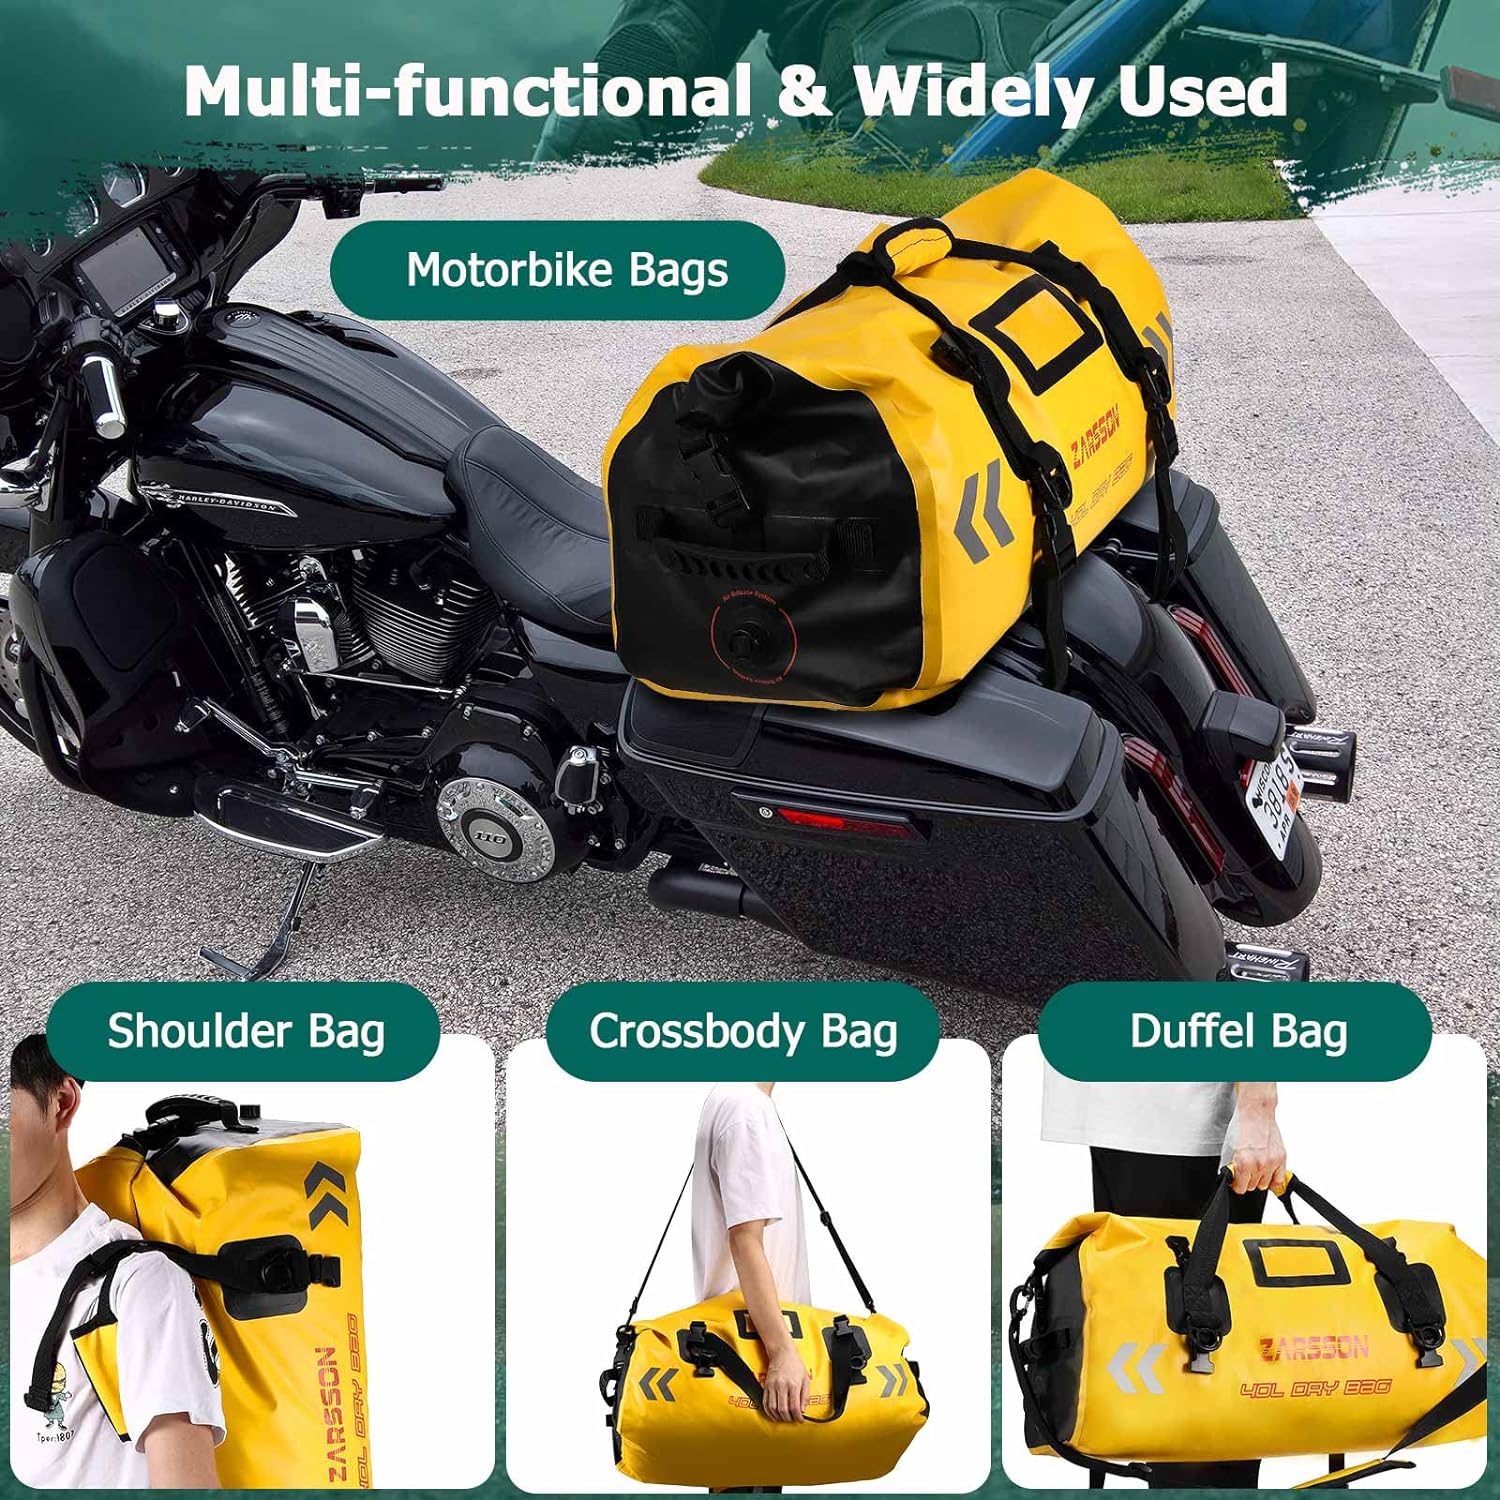 Waterproof Duffel Bag Large Dry Bags Waterproof Motorcycle Dry Bag 40L/66L for Travel Duffle Drybag Heavy Duty Roll Top Closure with Molle Loops Durable Straps and Handles for Kayaking Camping Boating